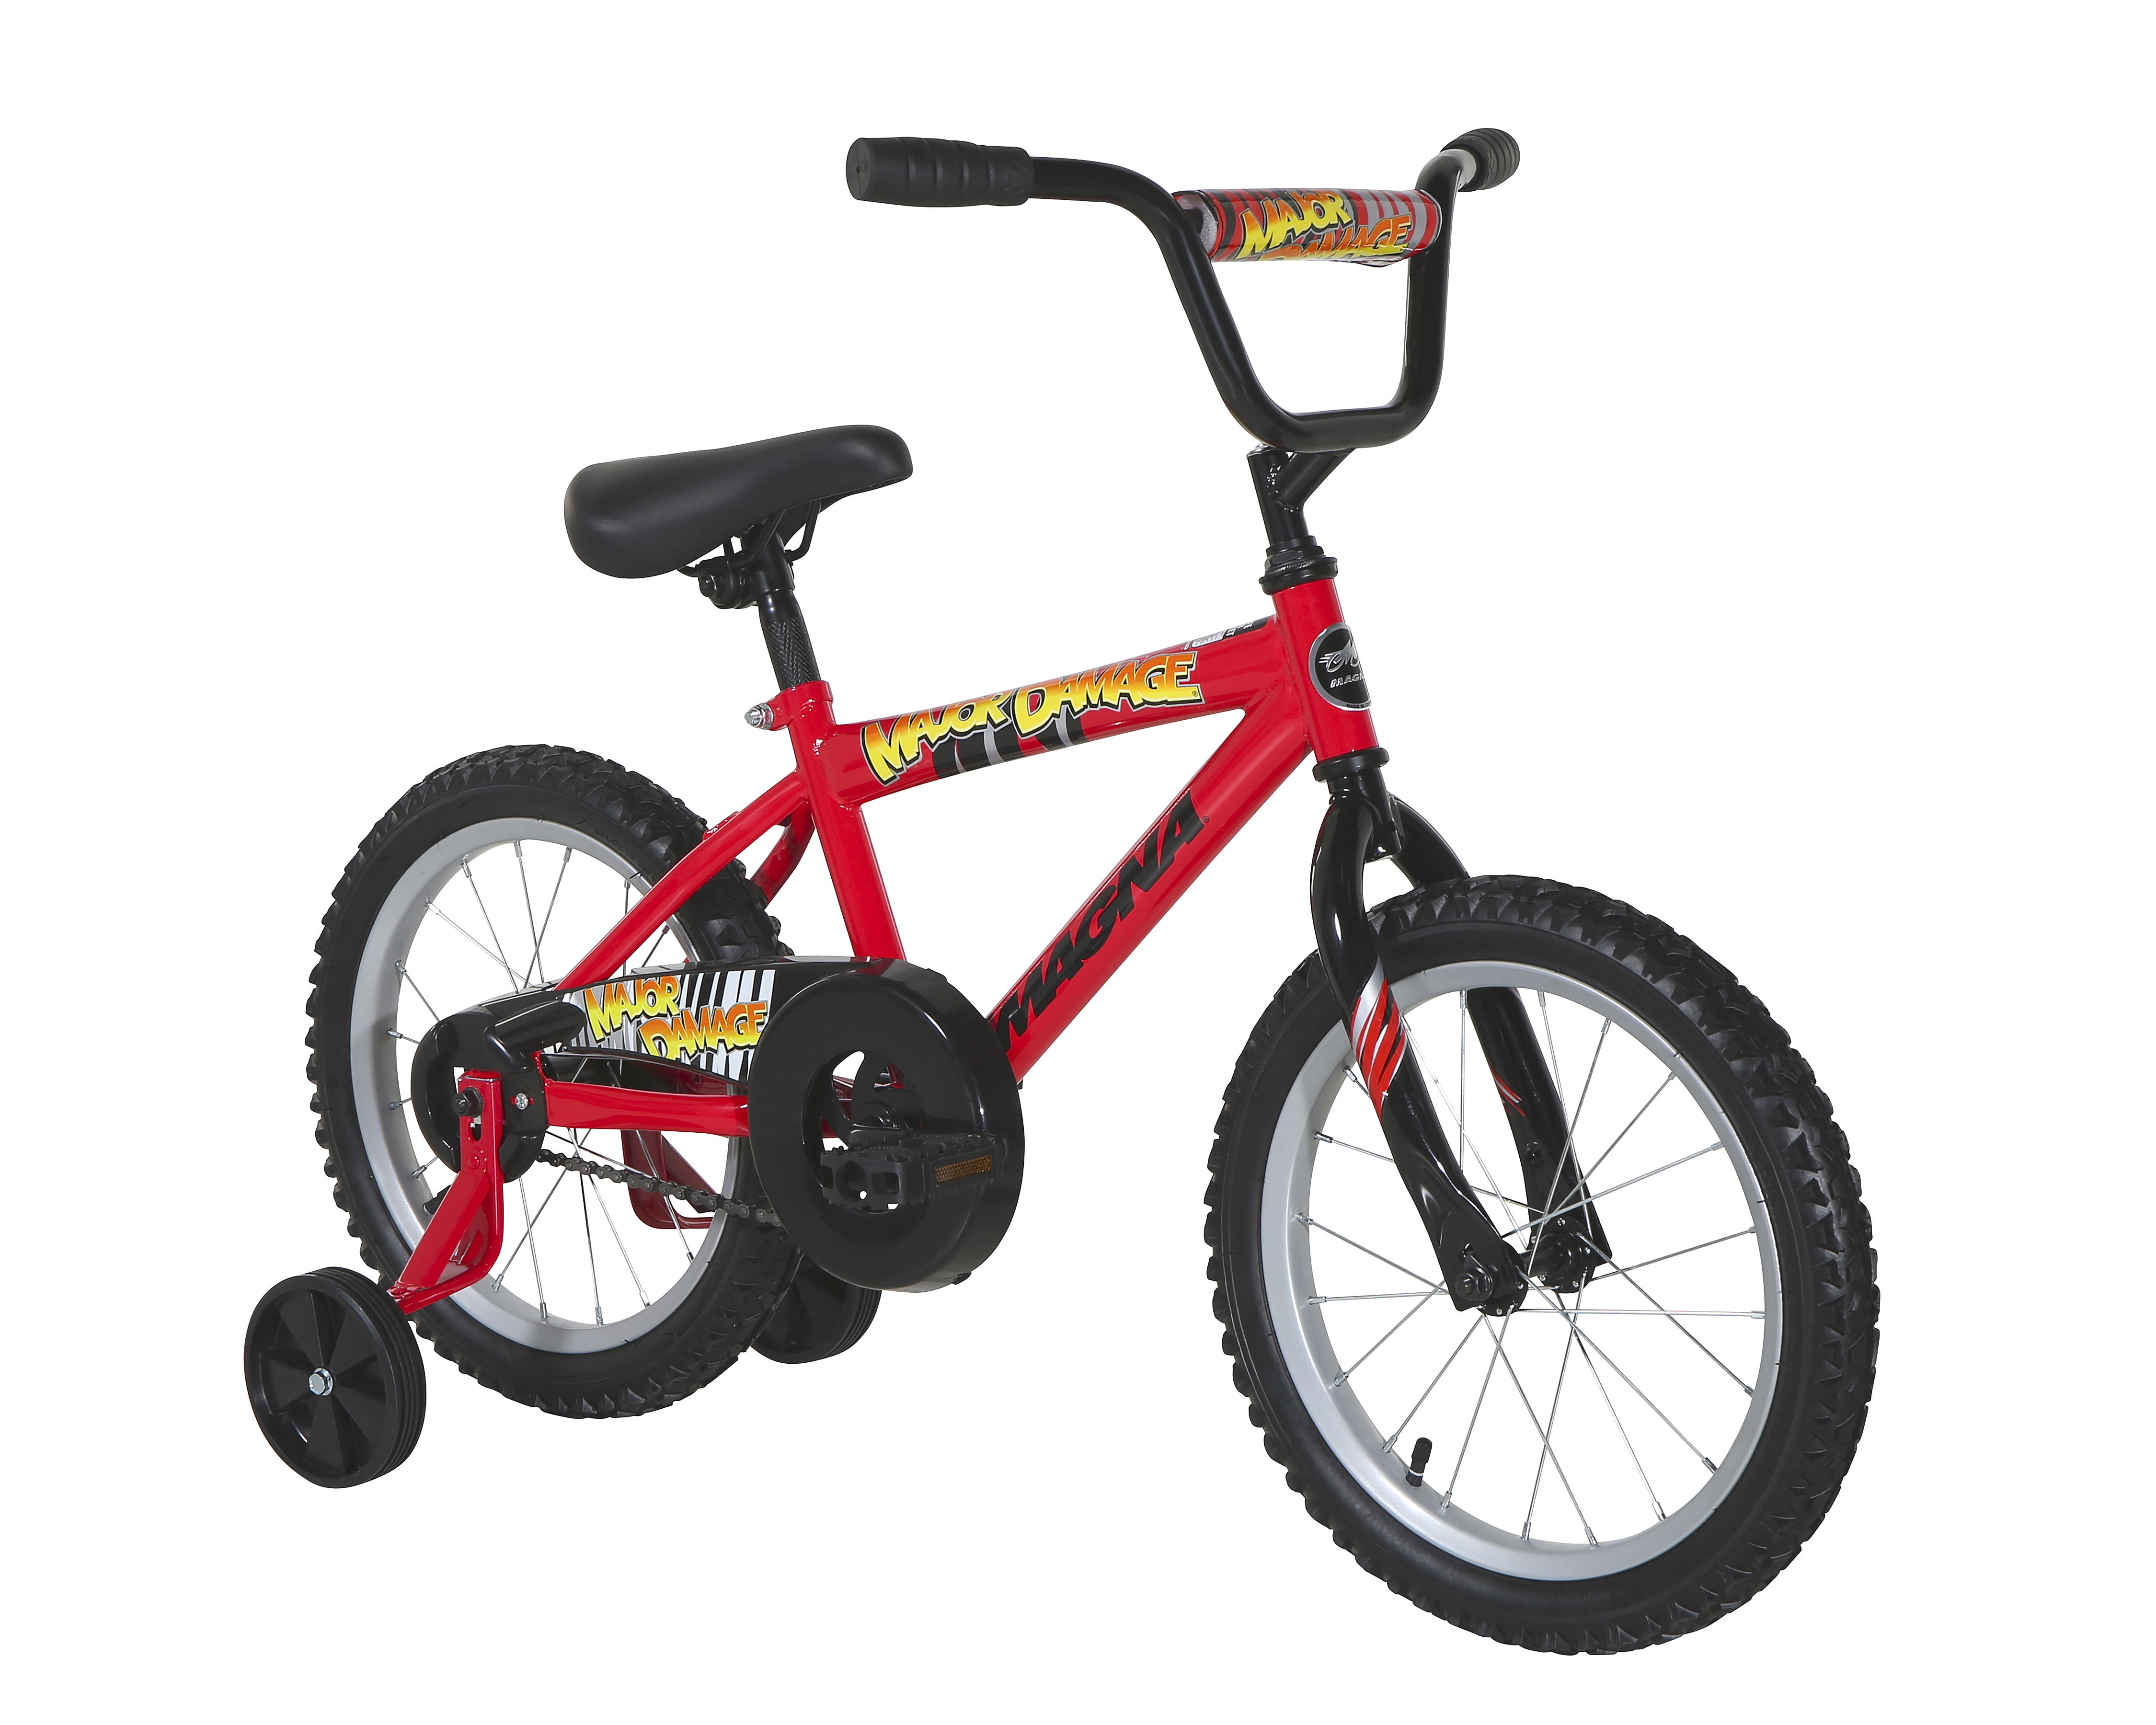 Photo 1 of ** USED *** MISSING PARTS***  Magna Dynacraft Major Damage Bike, 12-20-Inch Wheels, Boys Ages 3-10 Years Old
